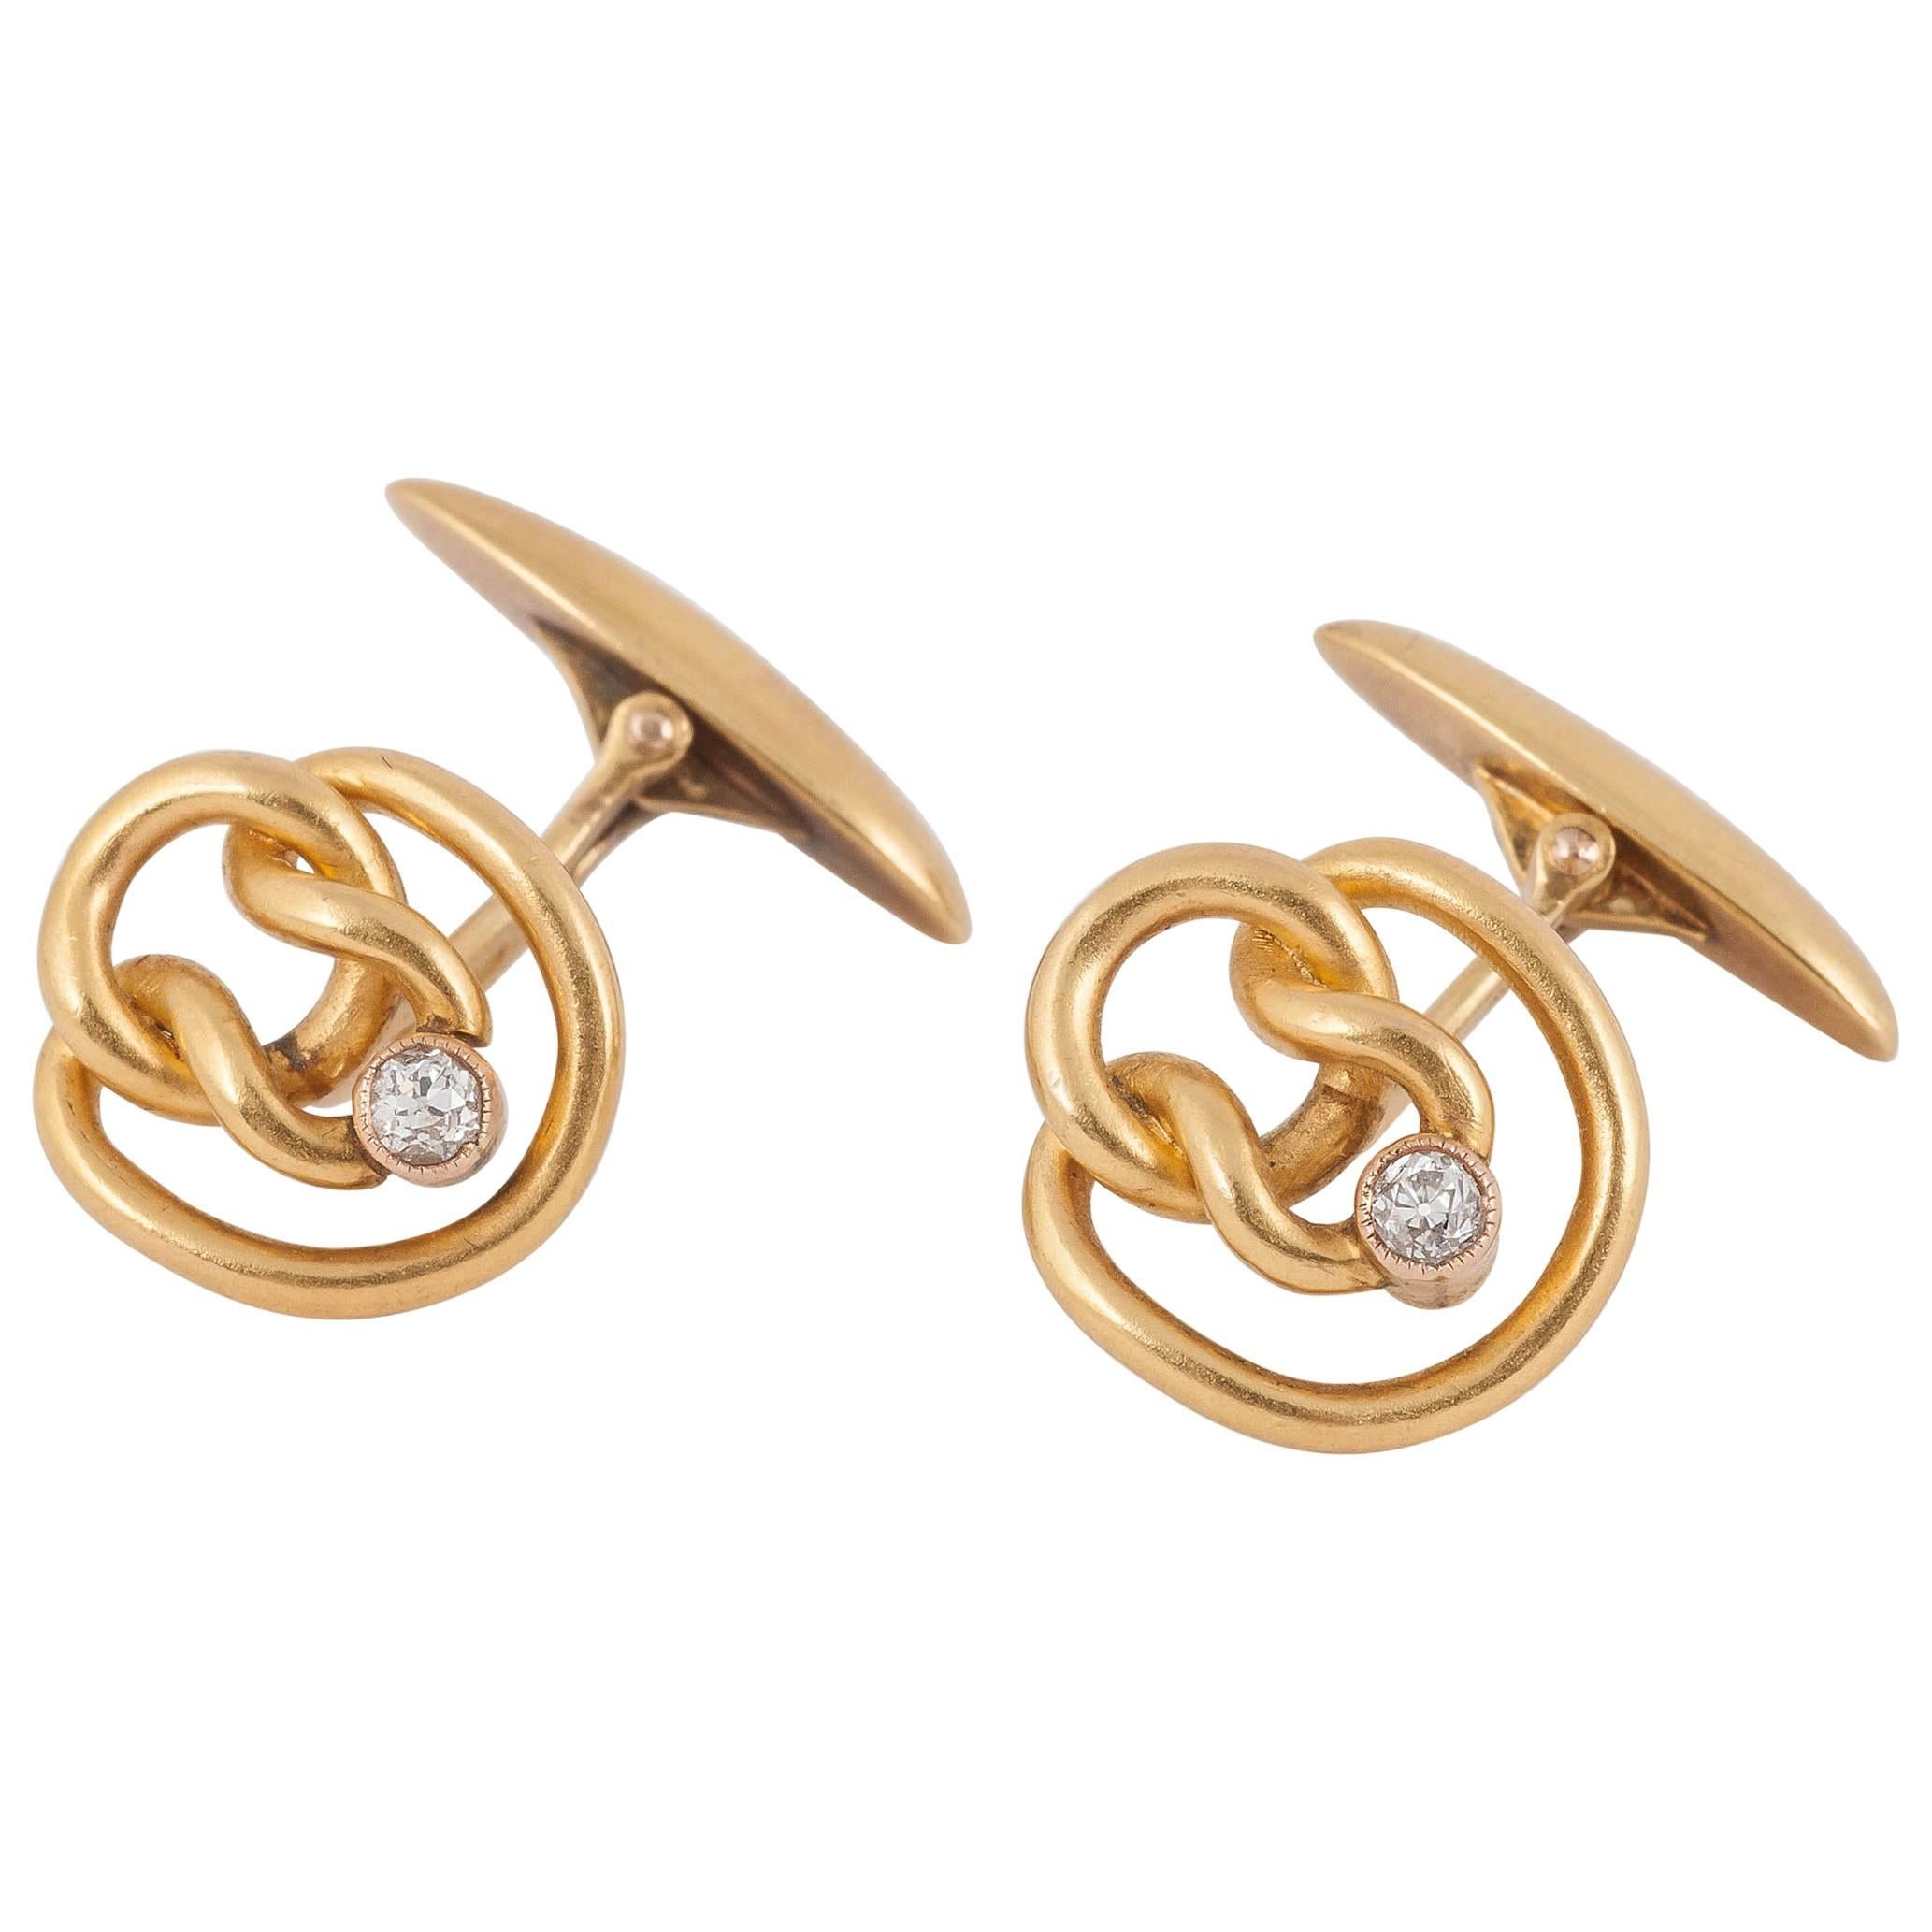 Cufflinks, 14 Karat Gold Entwined Knots with Diamond Collet, Russian circa 1890 For Sale